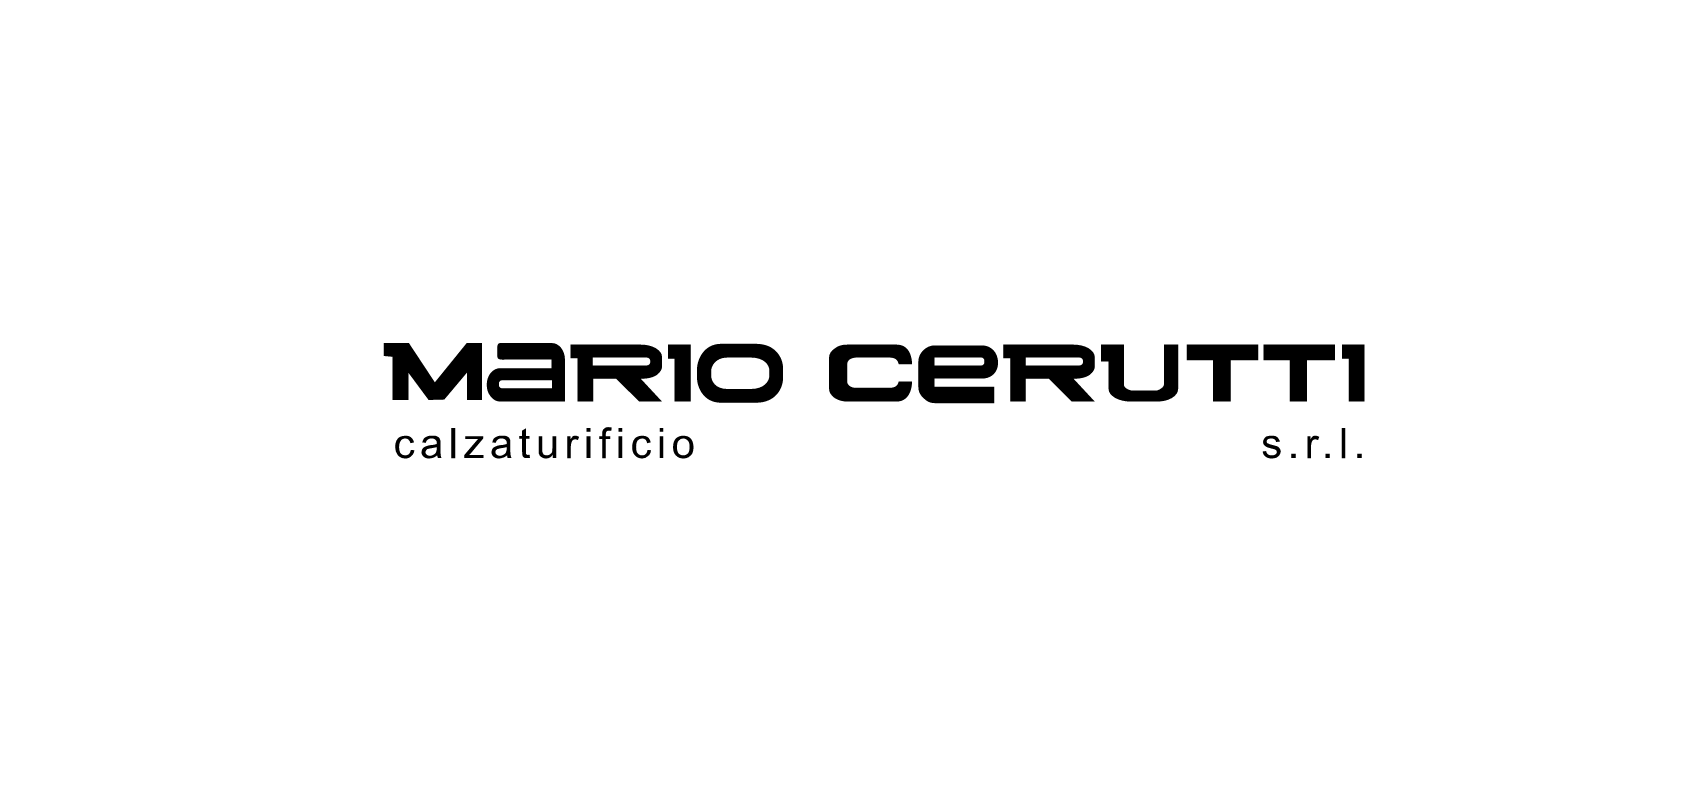 Download Mario Cerutti Logo PNG and Vector (PDF, SVG, Ai, EPS) Free